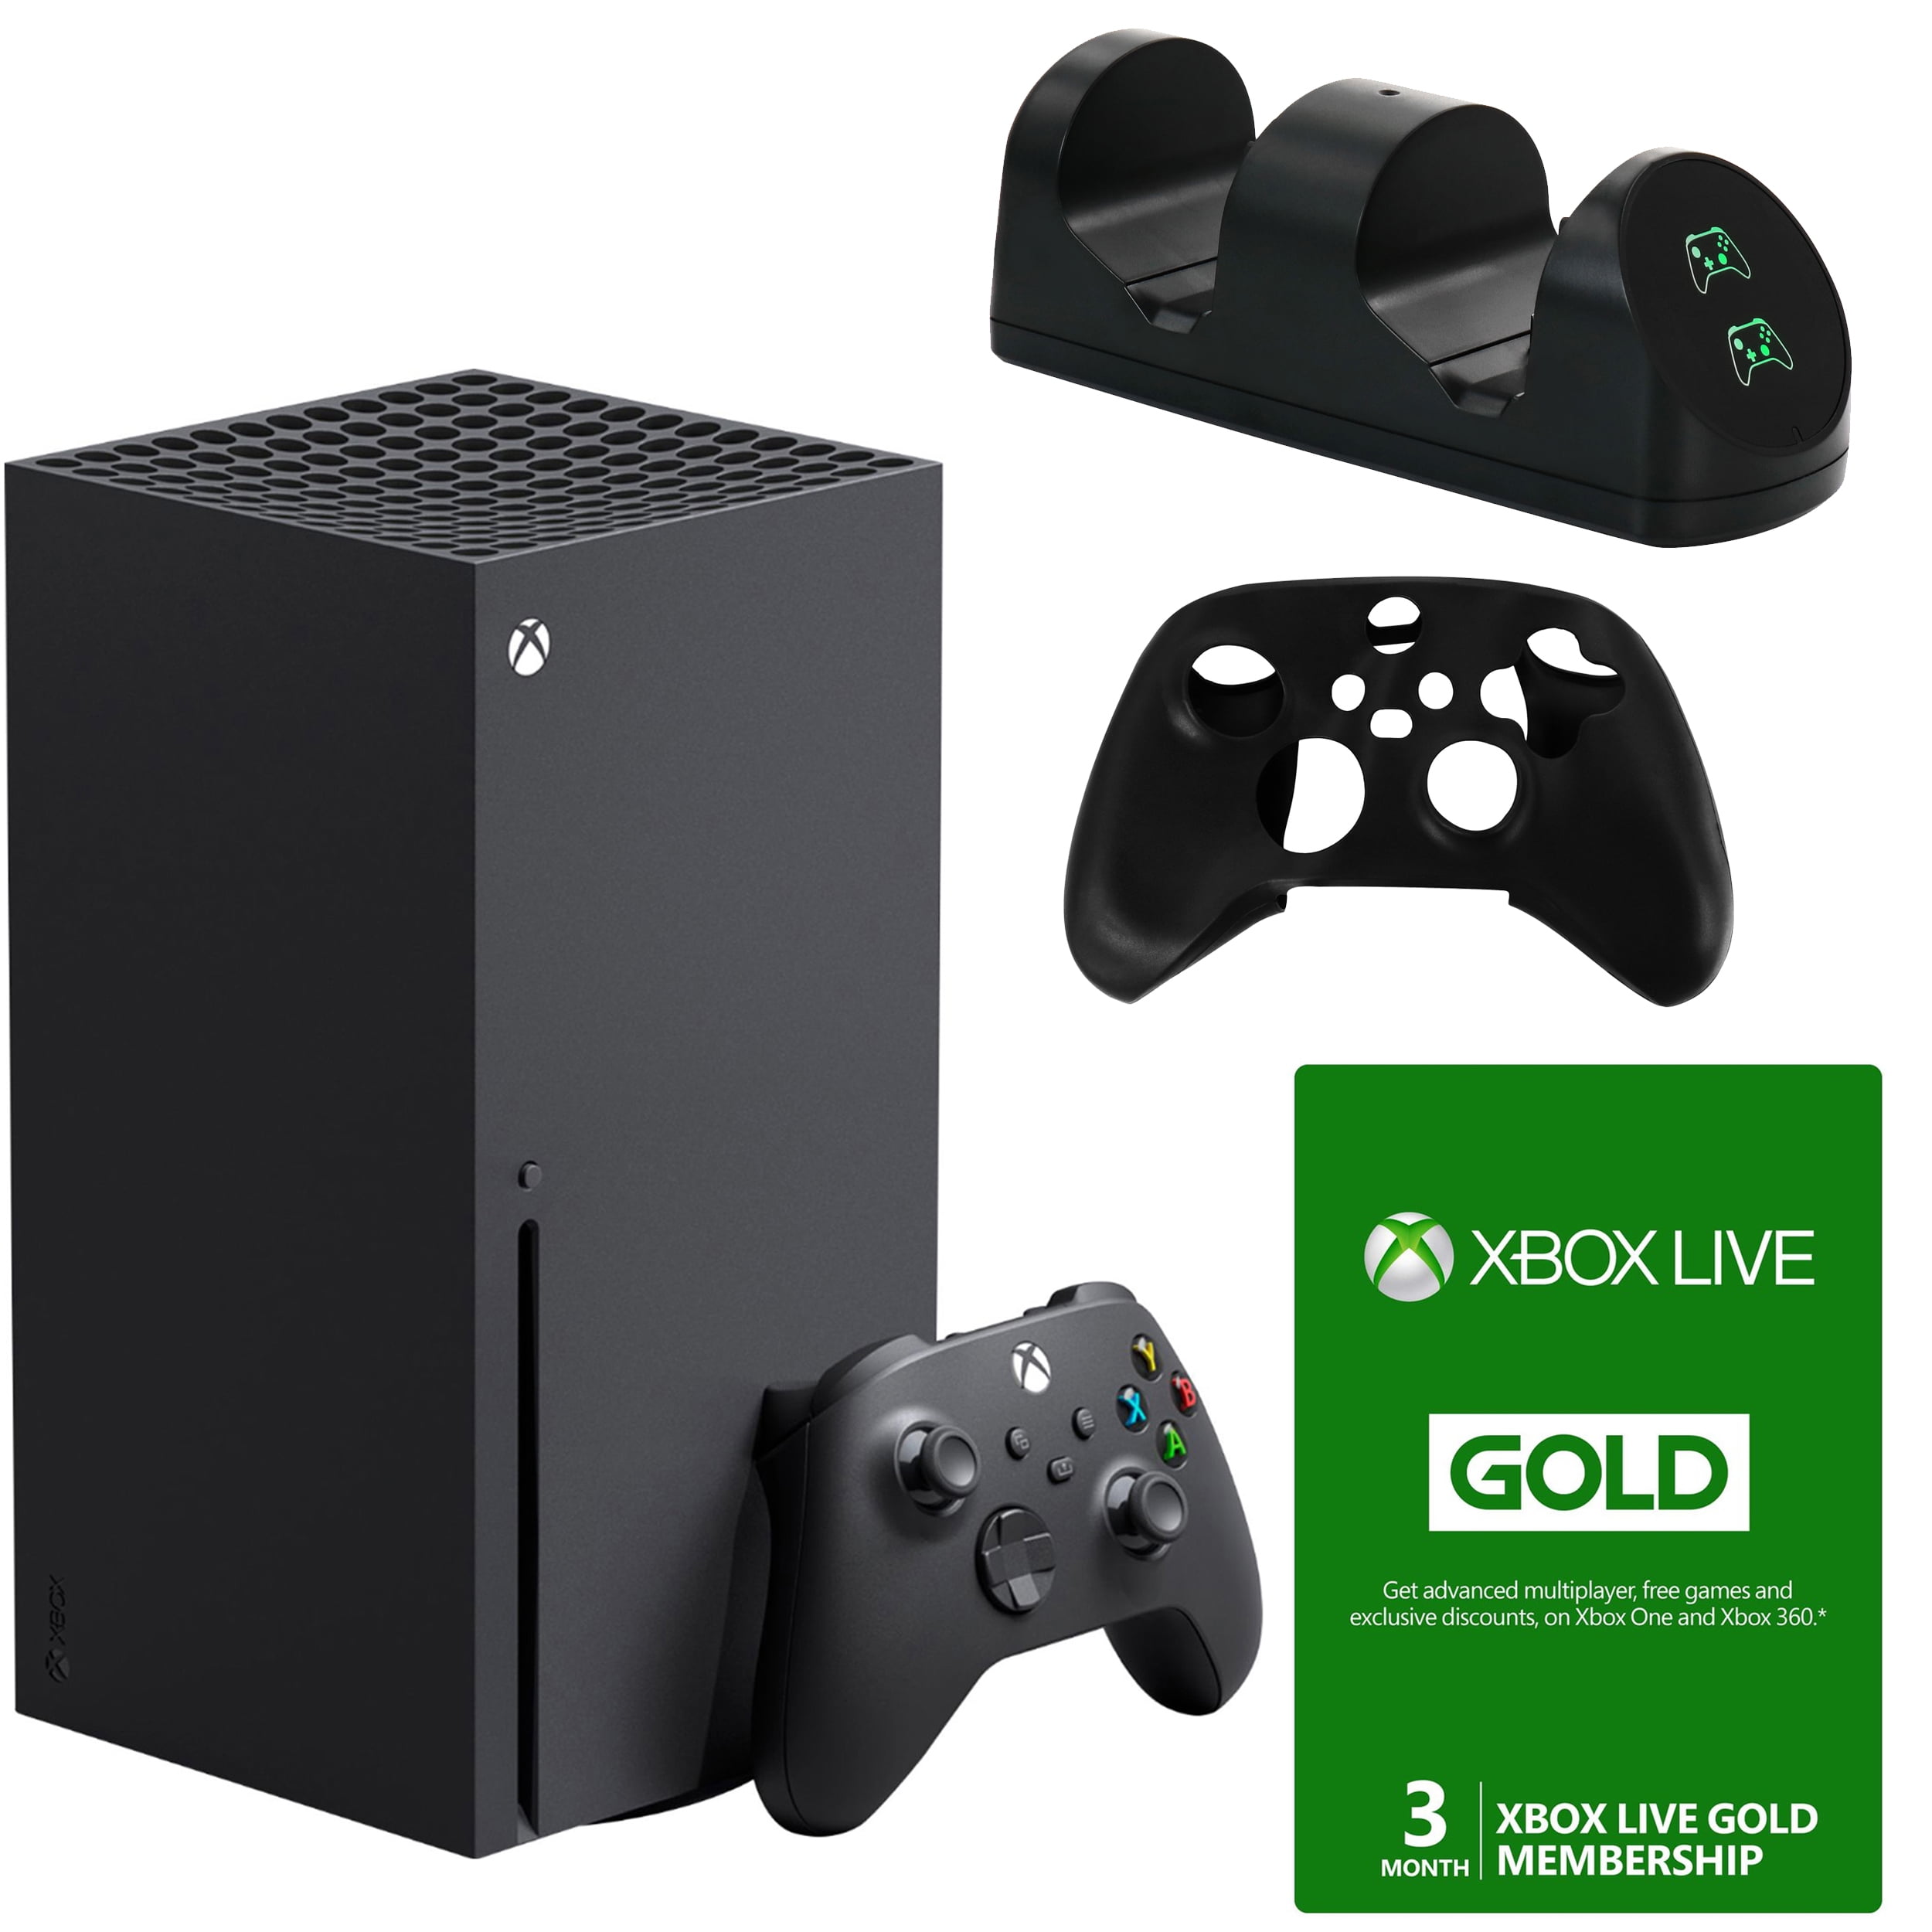 Microsoft Xbox Series S 512 GB SSD All-Digital Console (Disc-Free Gaming) -  Fortnite & Rocket League - Wireless Controller (Renewed)